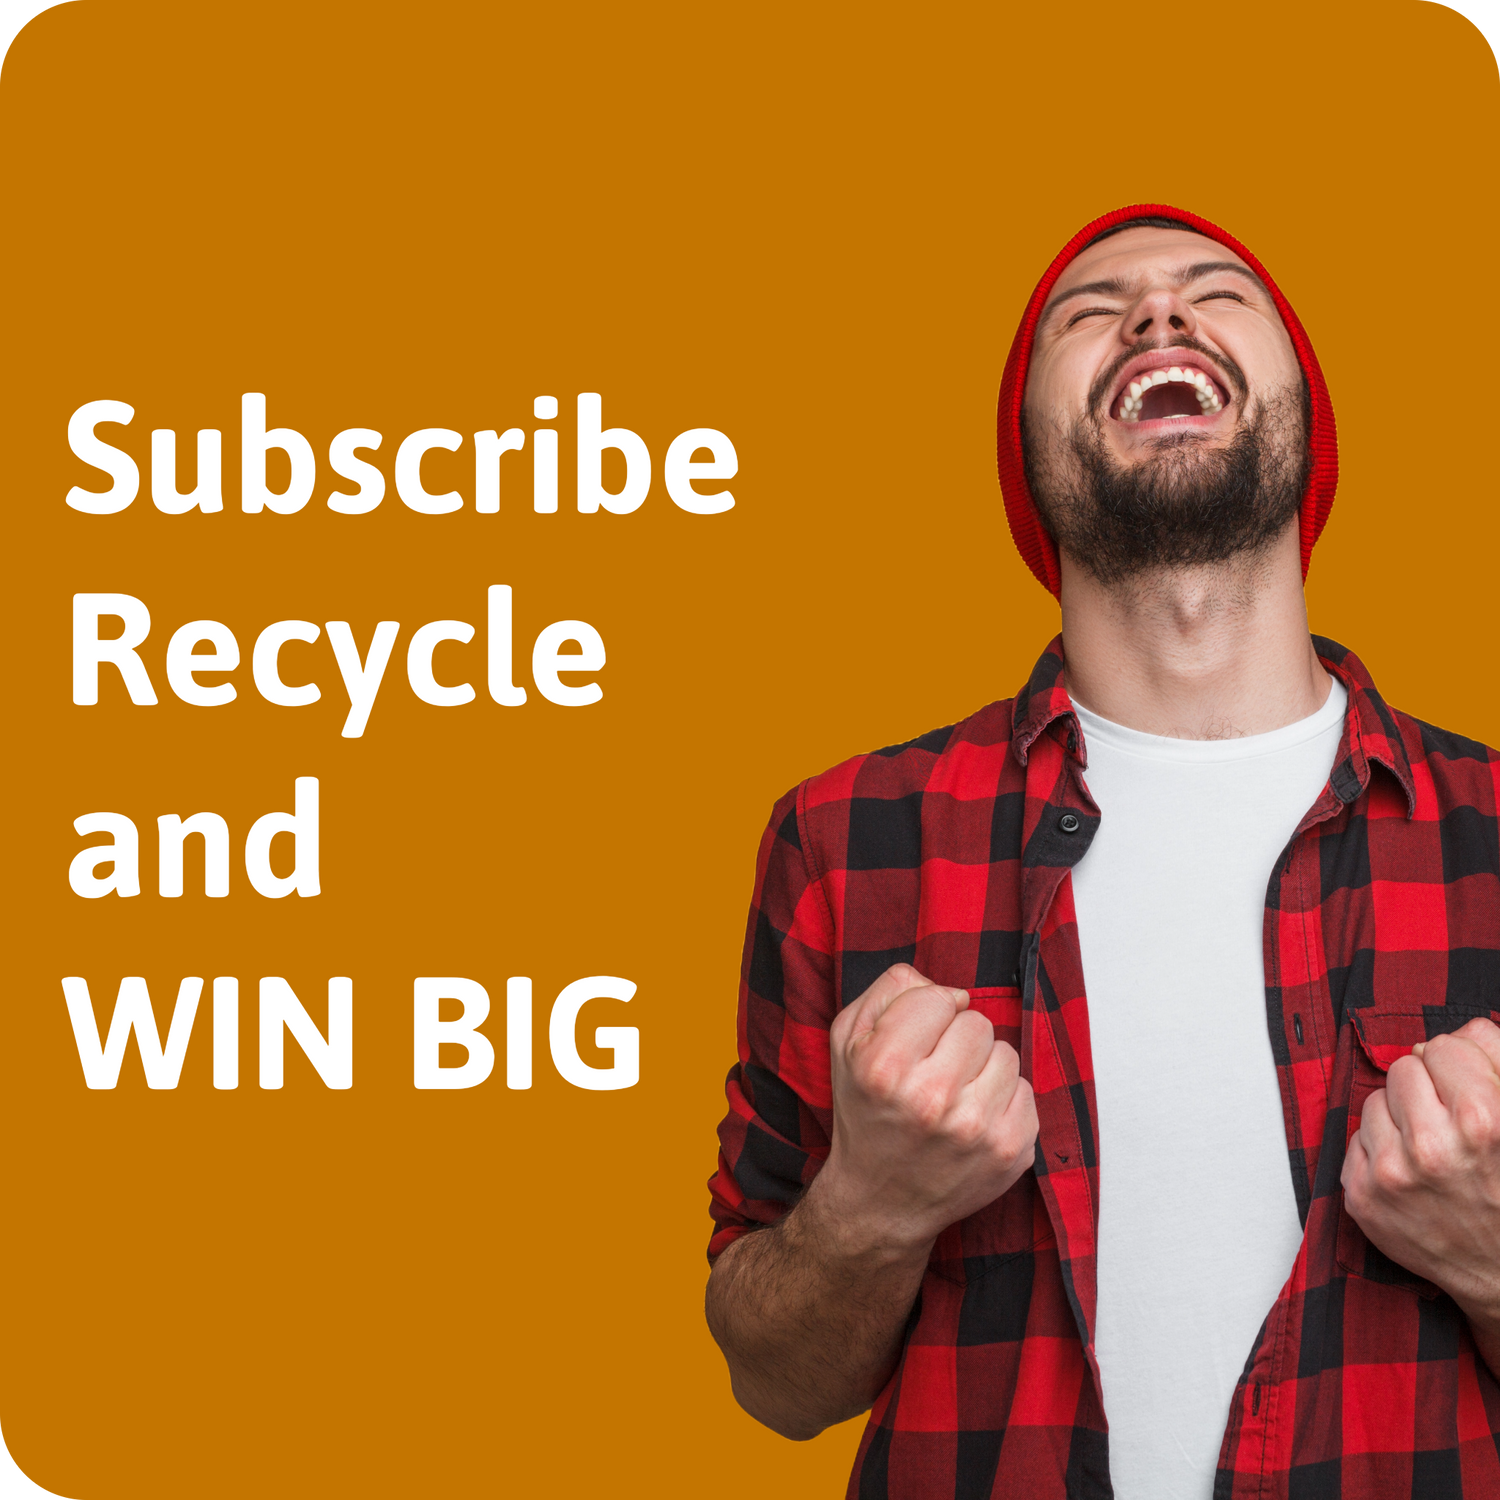 Recycle and win big is the text on this image. White text on an orange background with a man dressed in a red plaid flannel excited fist clenched.